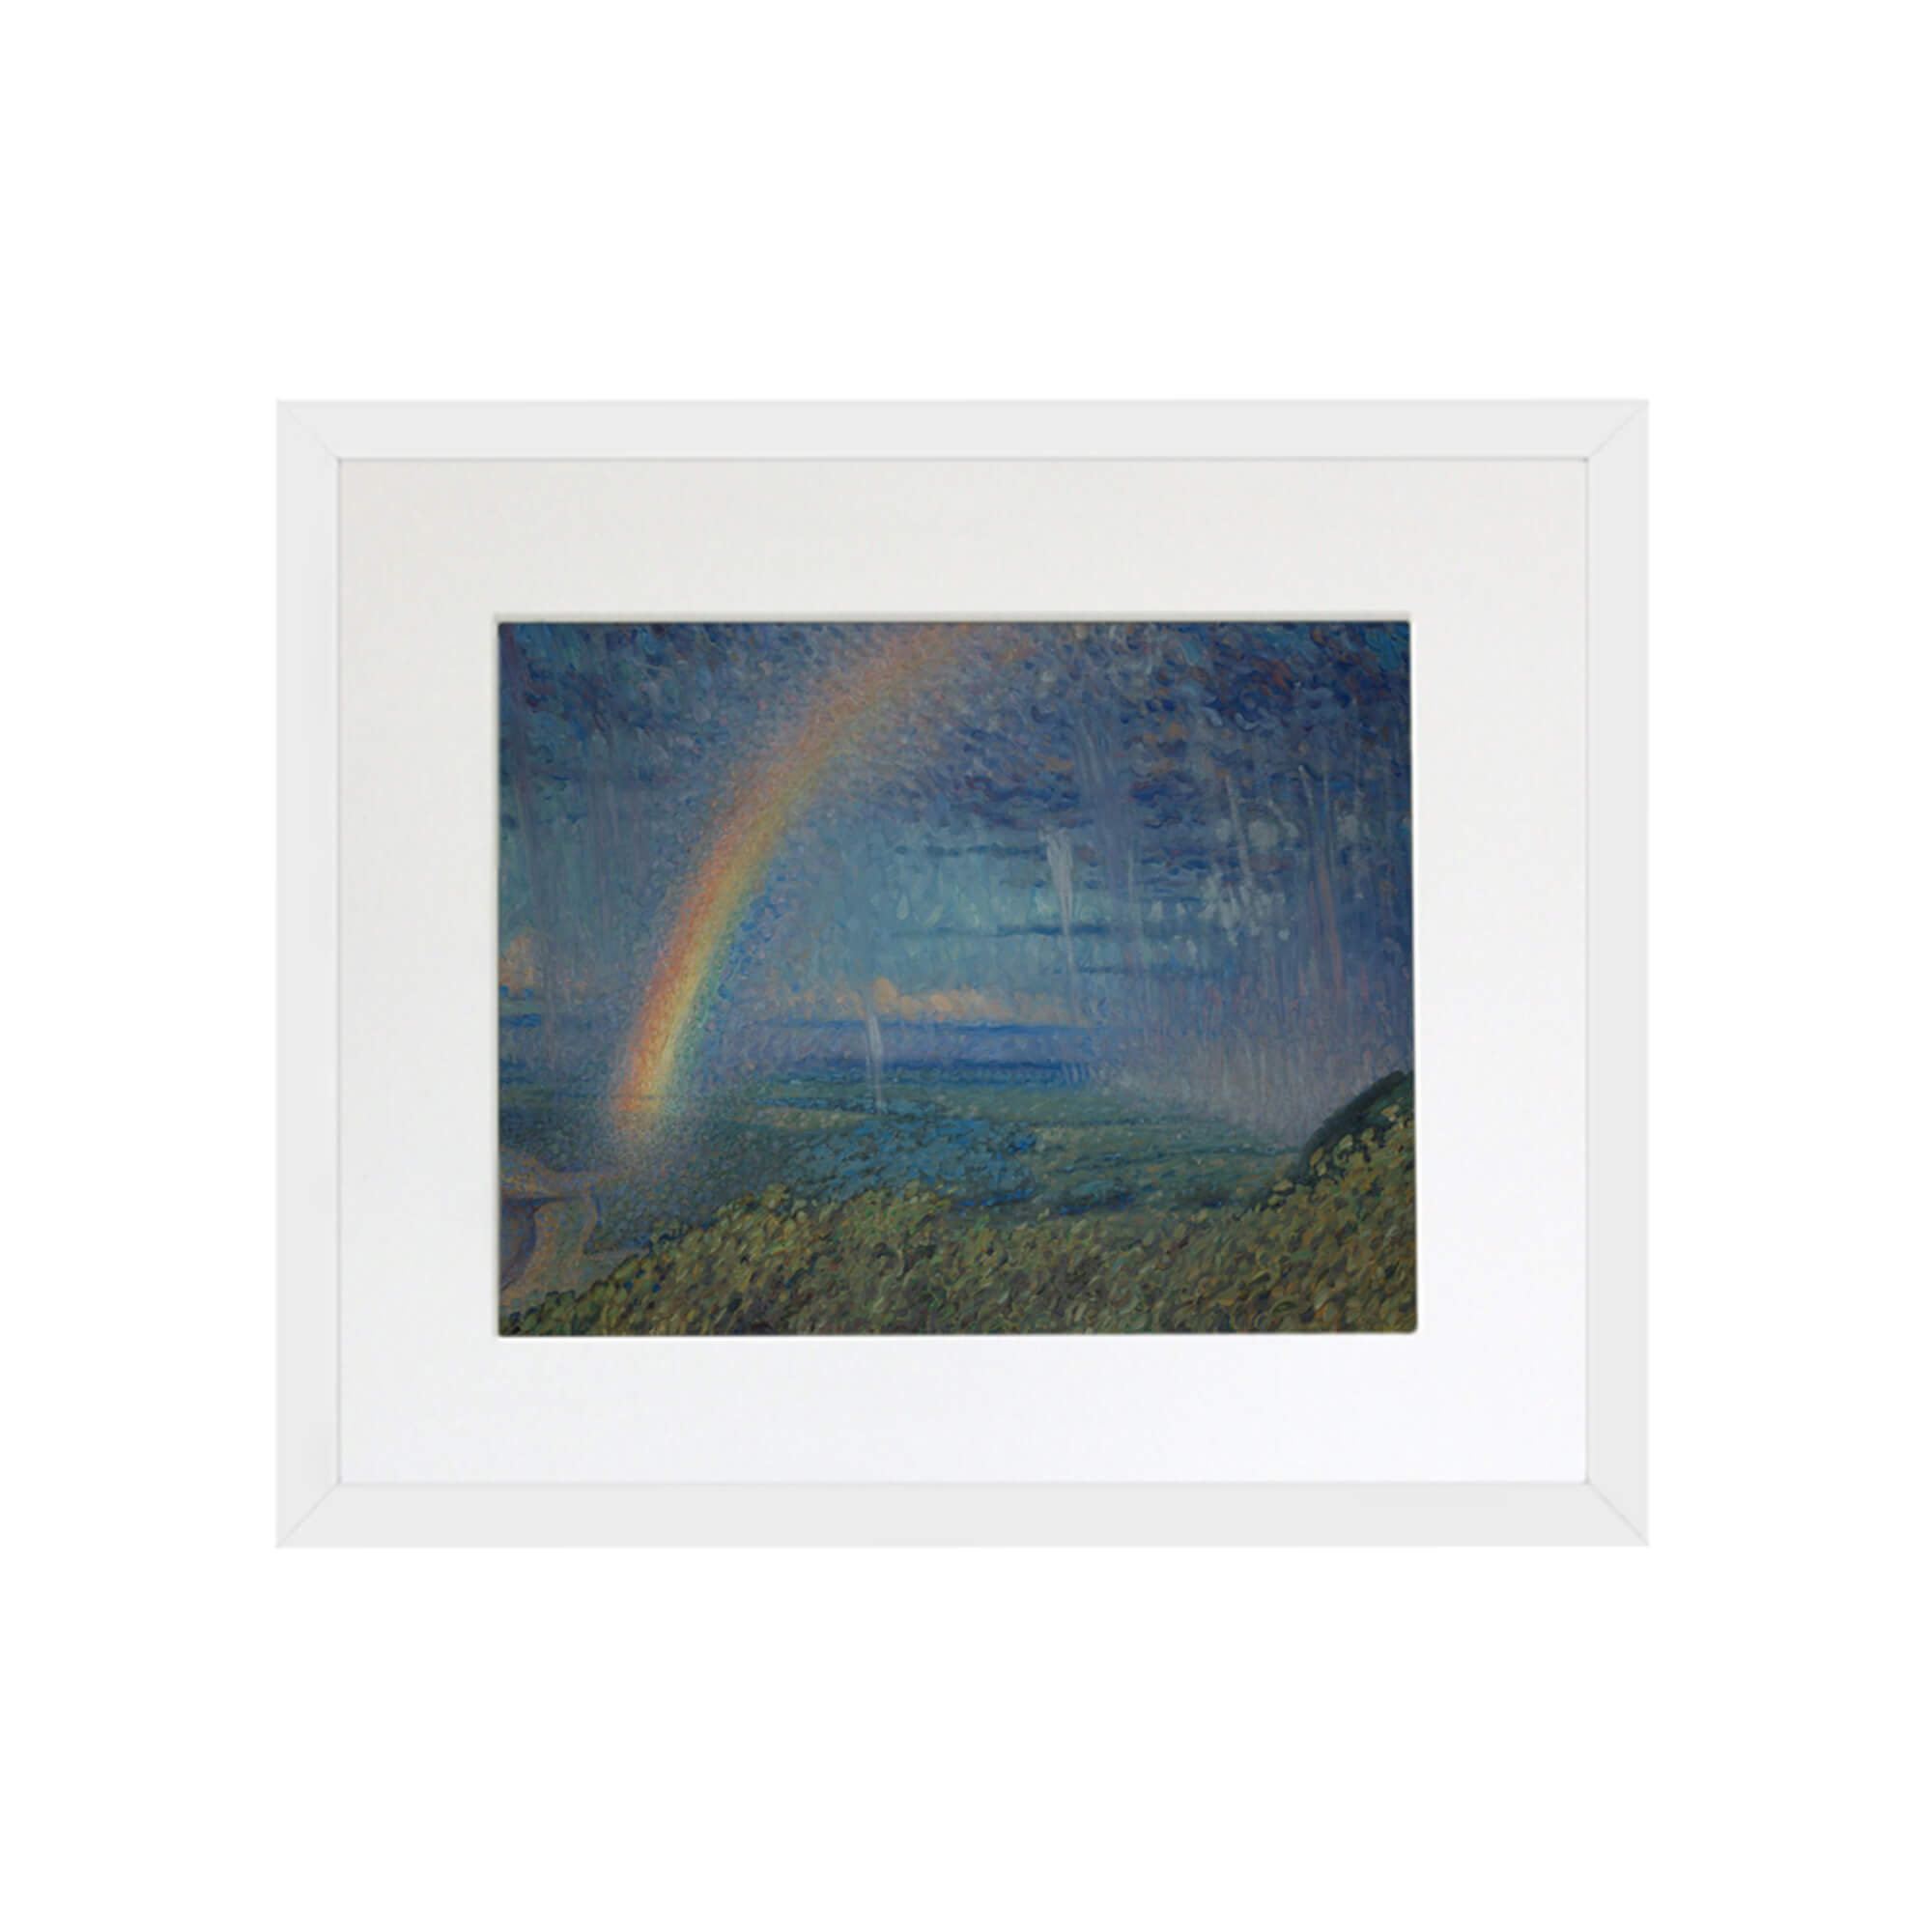 Blue-hued landscape with a rainbow